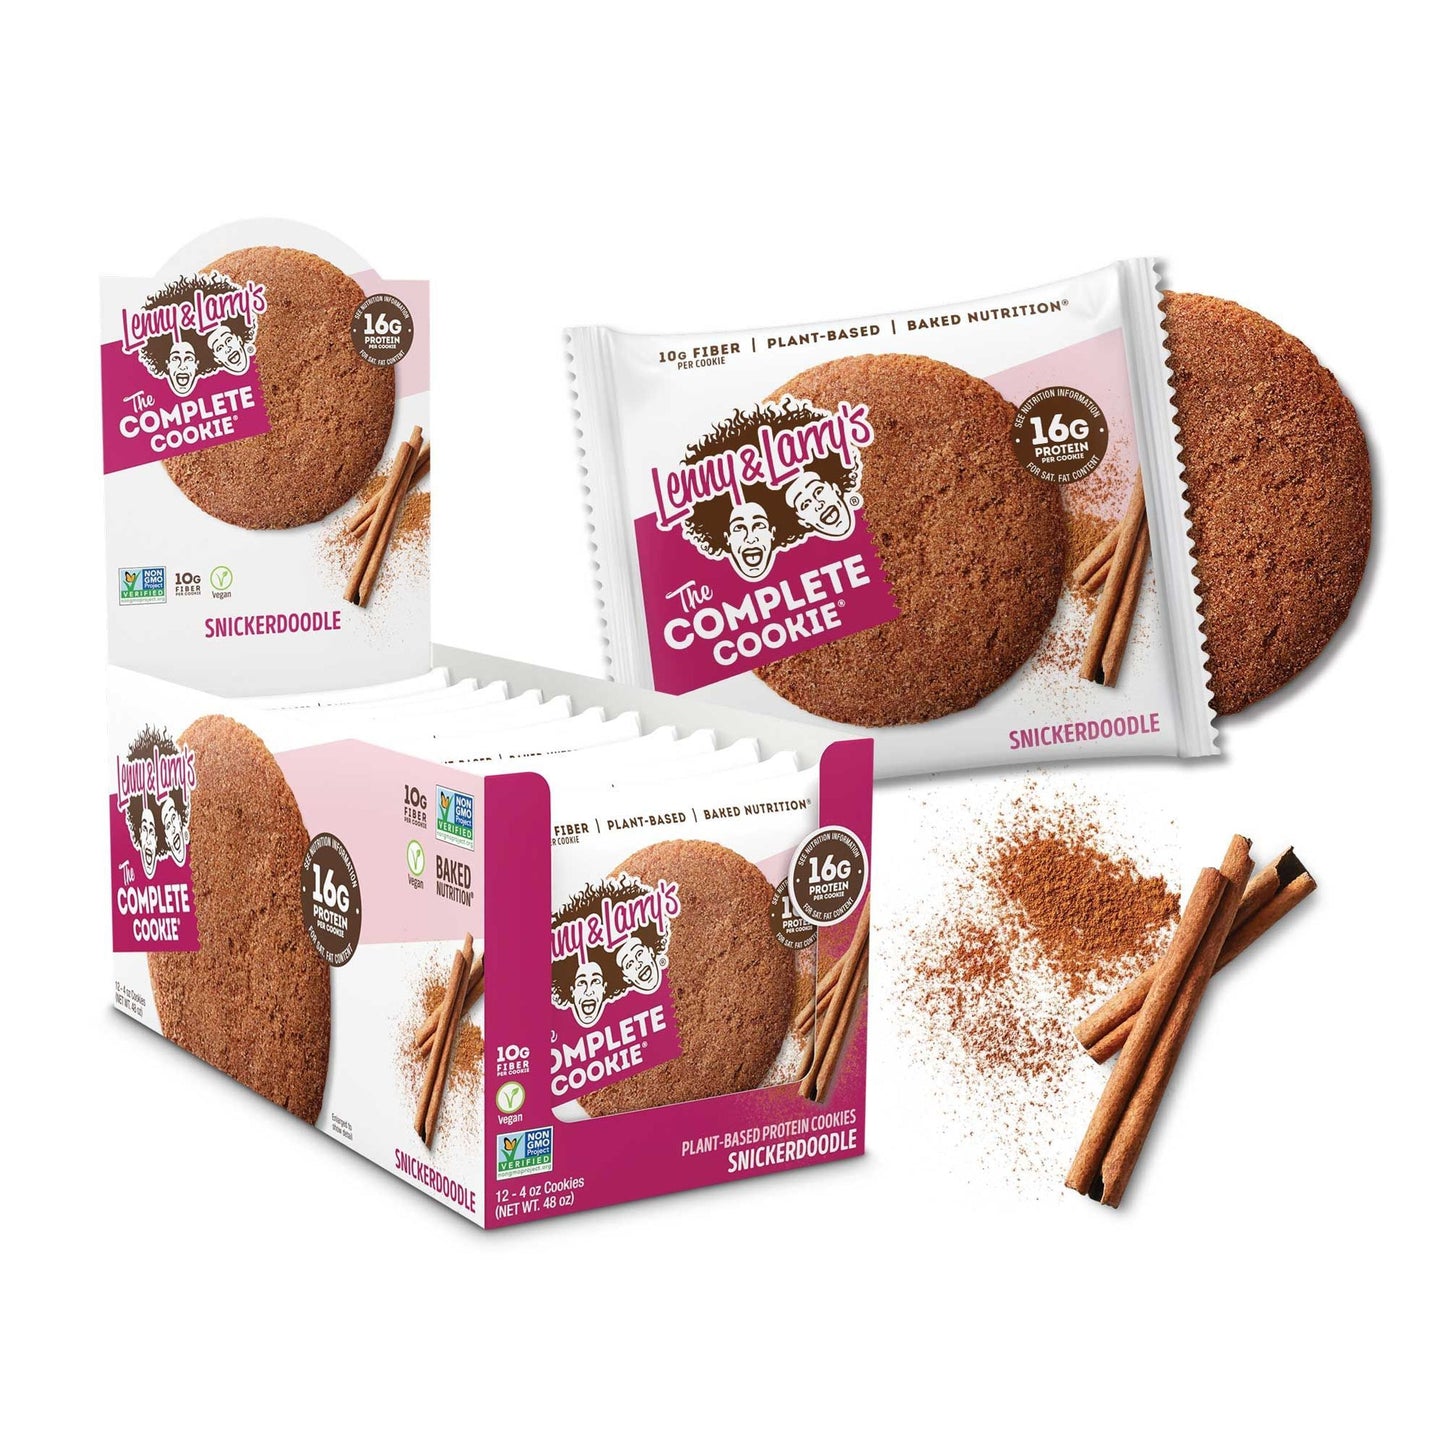 Lenny & Larry's The Complete Cookie, Single Cookie 113g Or A Box Of 12 Cookies, Snickerdoodle Flavour Vegan